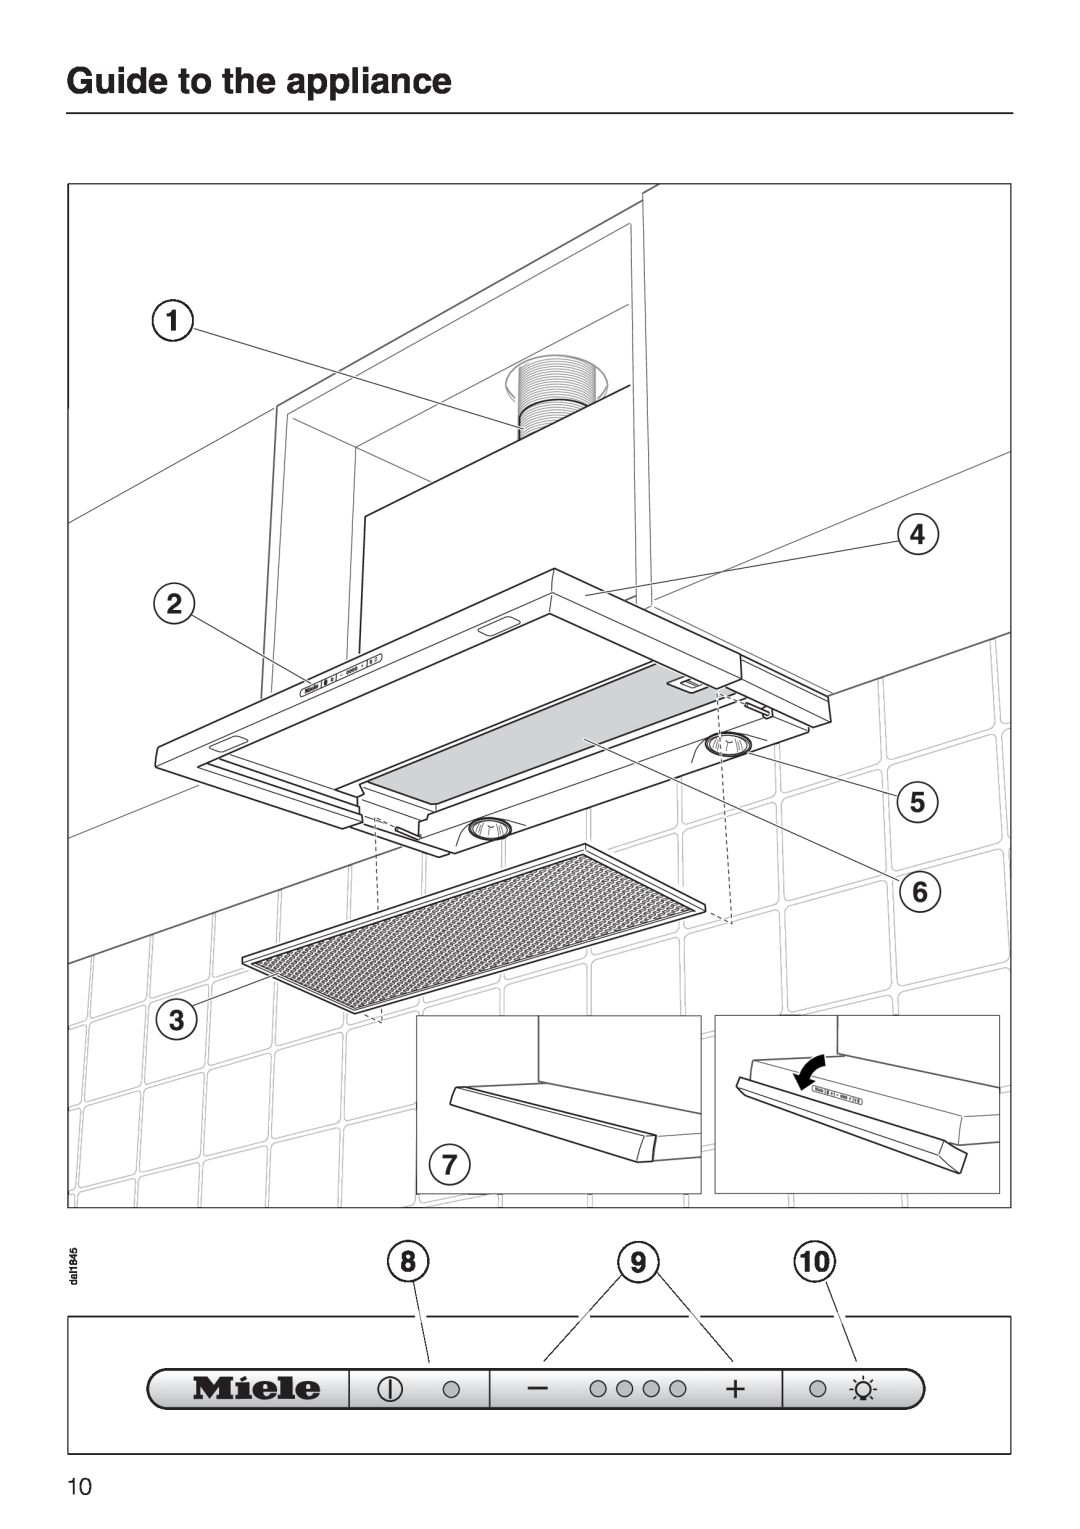 Miele DA 3190 EXT, DA 3160 EXT installation instructions Guide to the appliance 